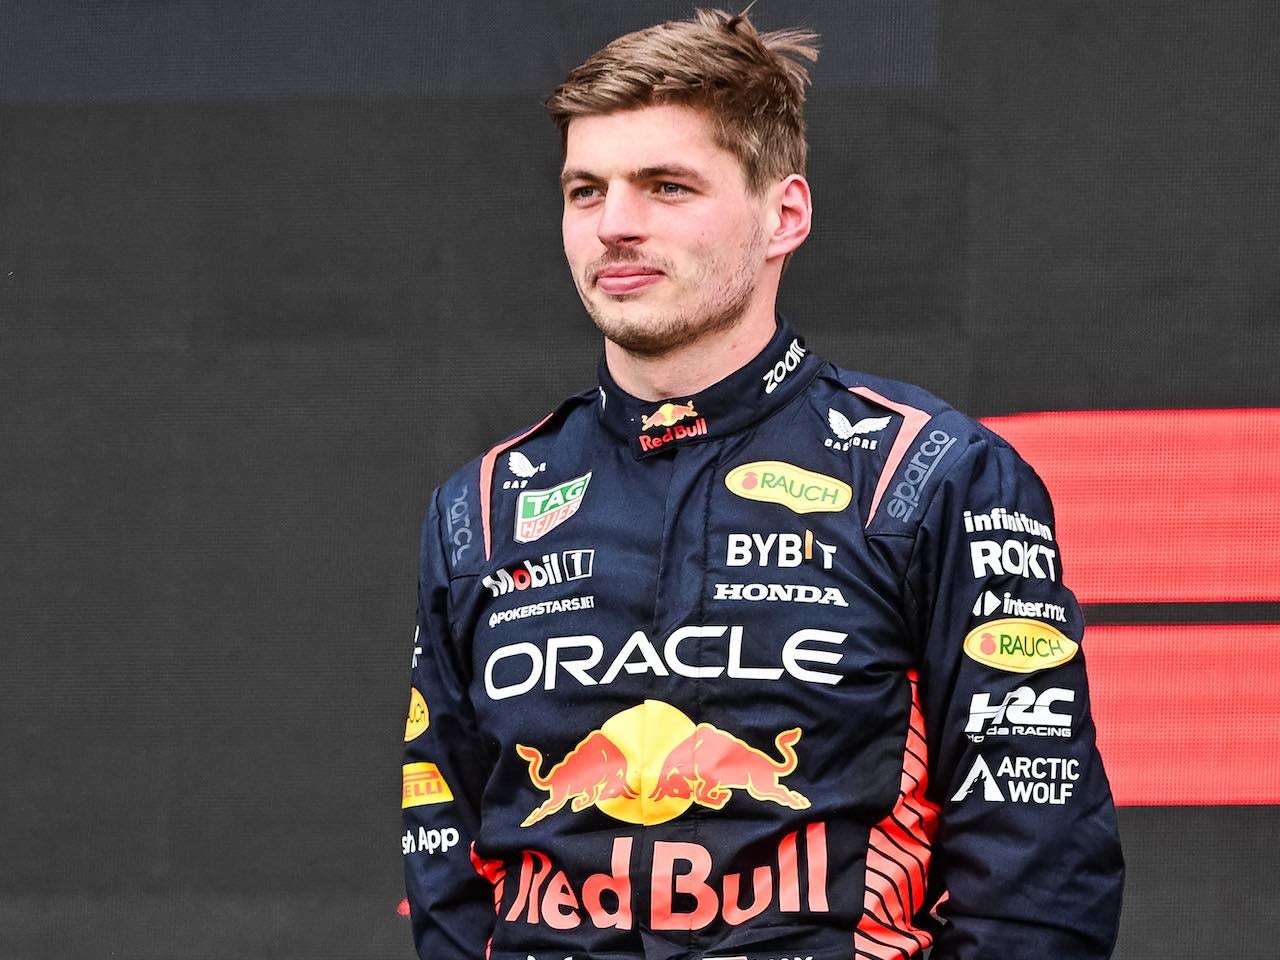 Verstappen open to any Red Bull teammate - manager